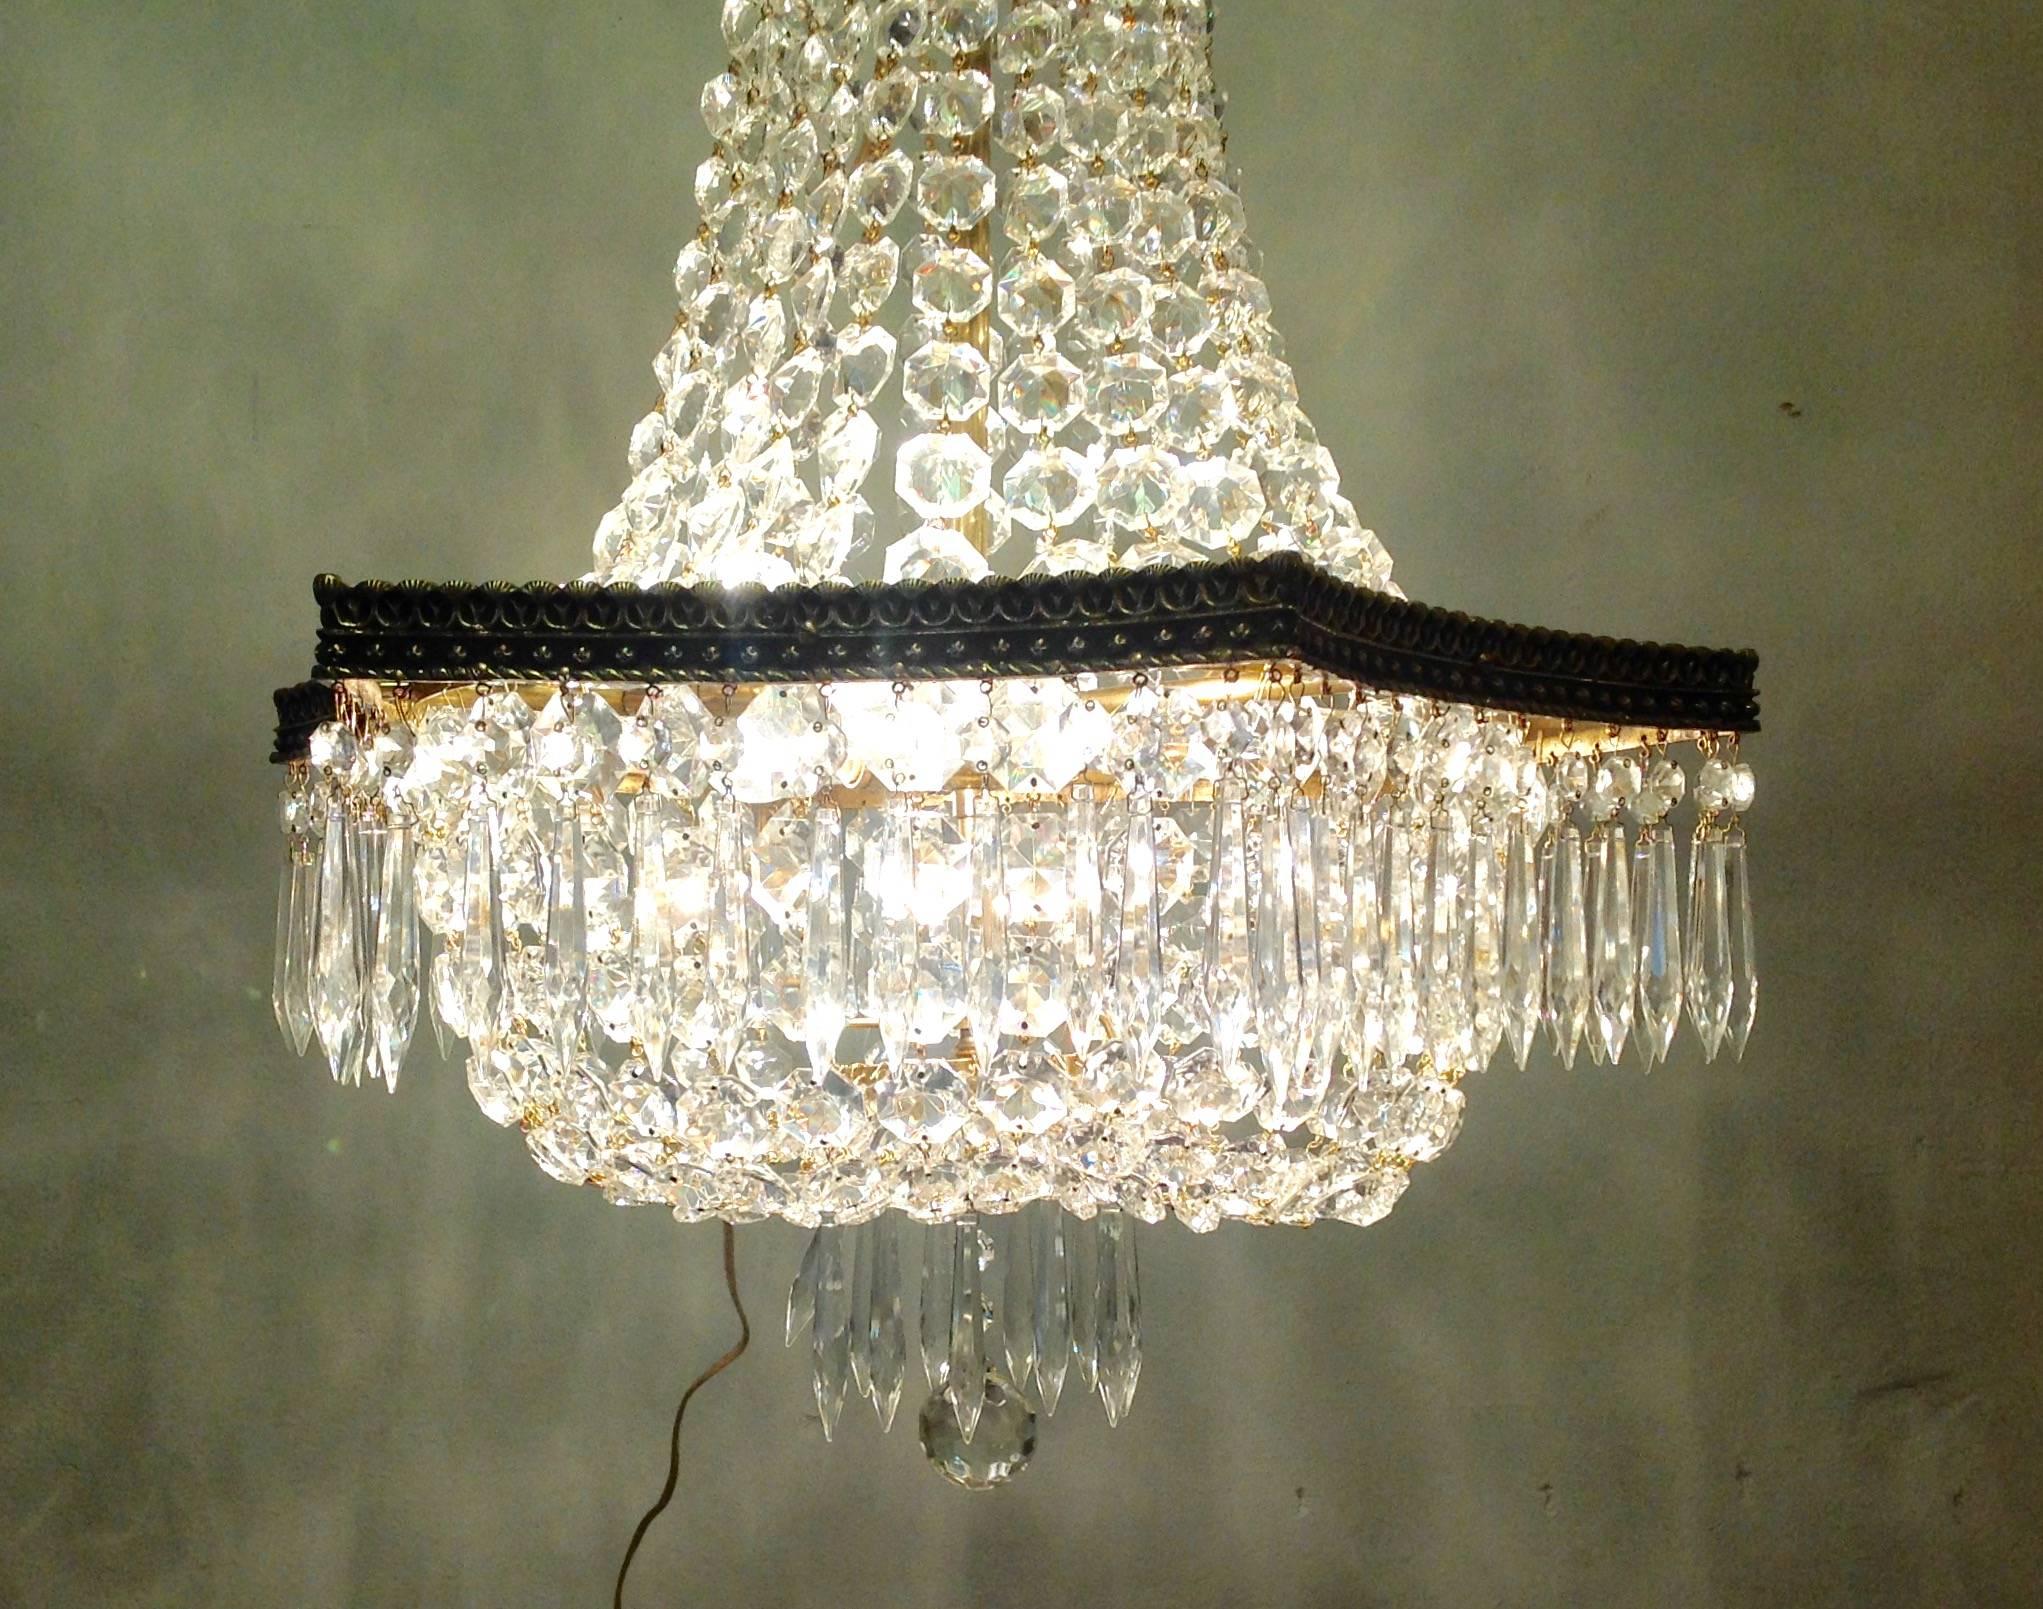 Spanish crystal Empire chandelier with antique inverted scalloped brass frame with shell motif, circa 1950s. Beaded crystal graduated strands and U-drop prisms are new. Has been rewired to UL standards. Measures 29.5 inches high and 20 inches wide.